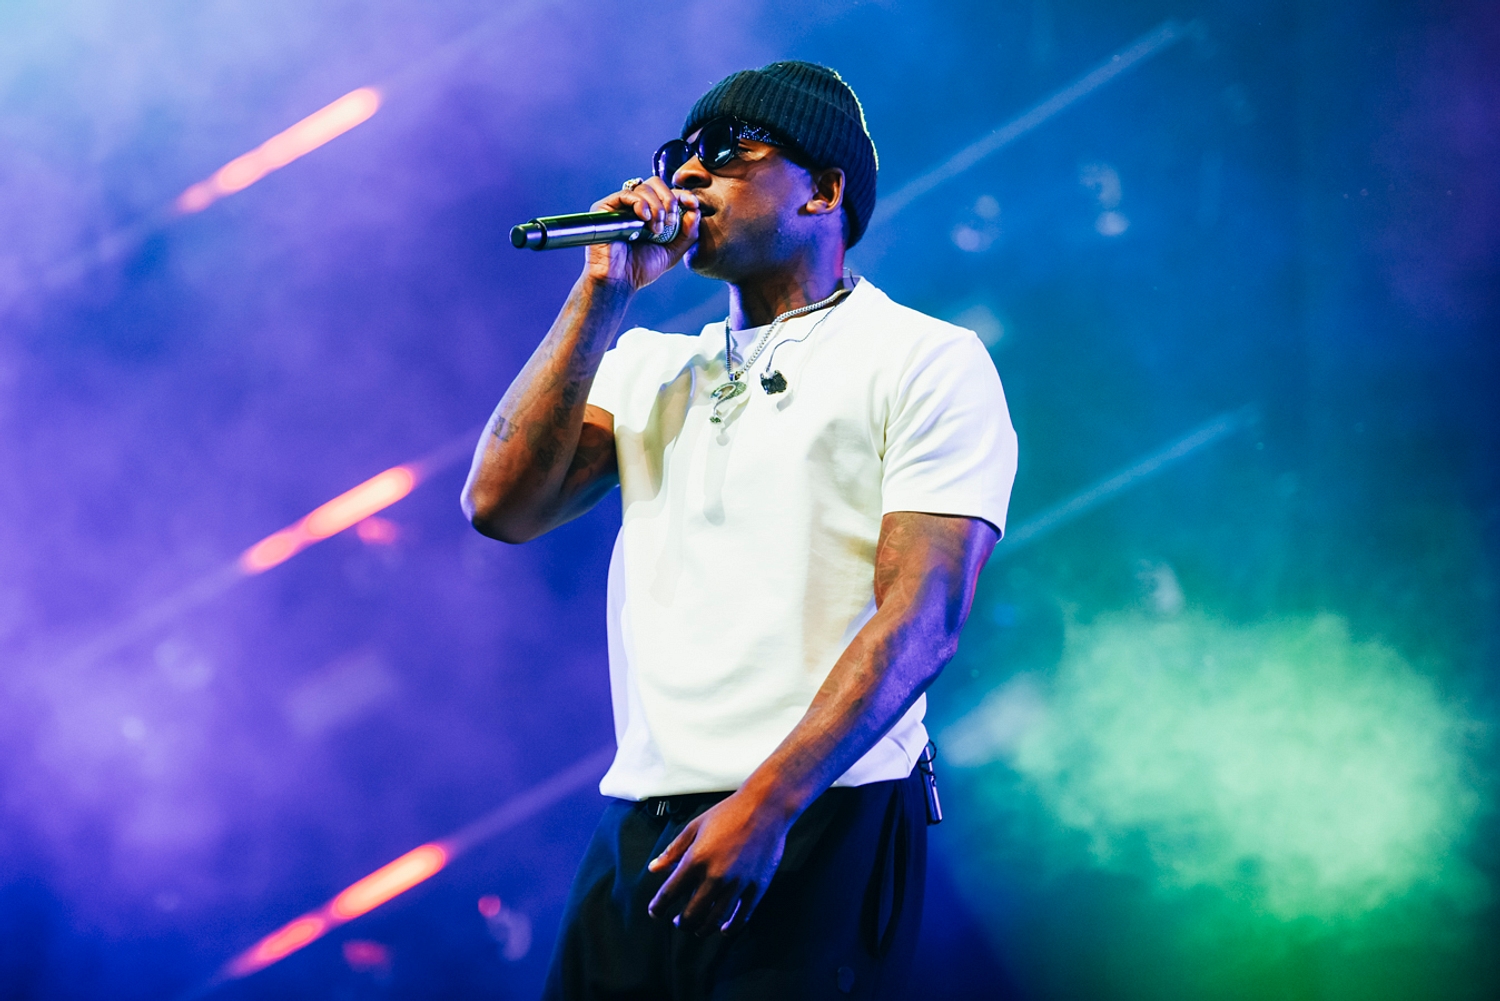 Vince Staples, alt-J and more keep the party going at Lowlands 2017